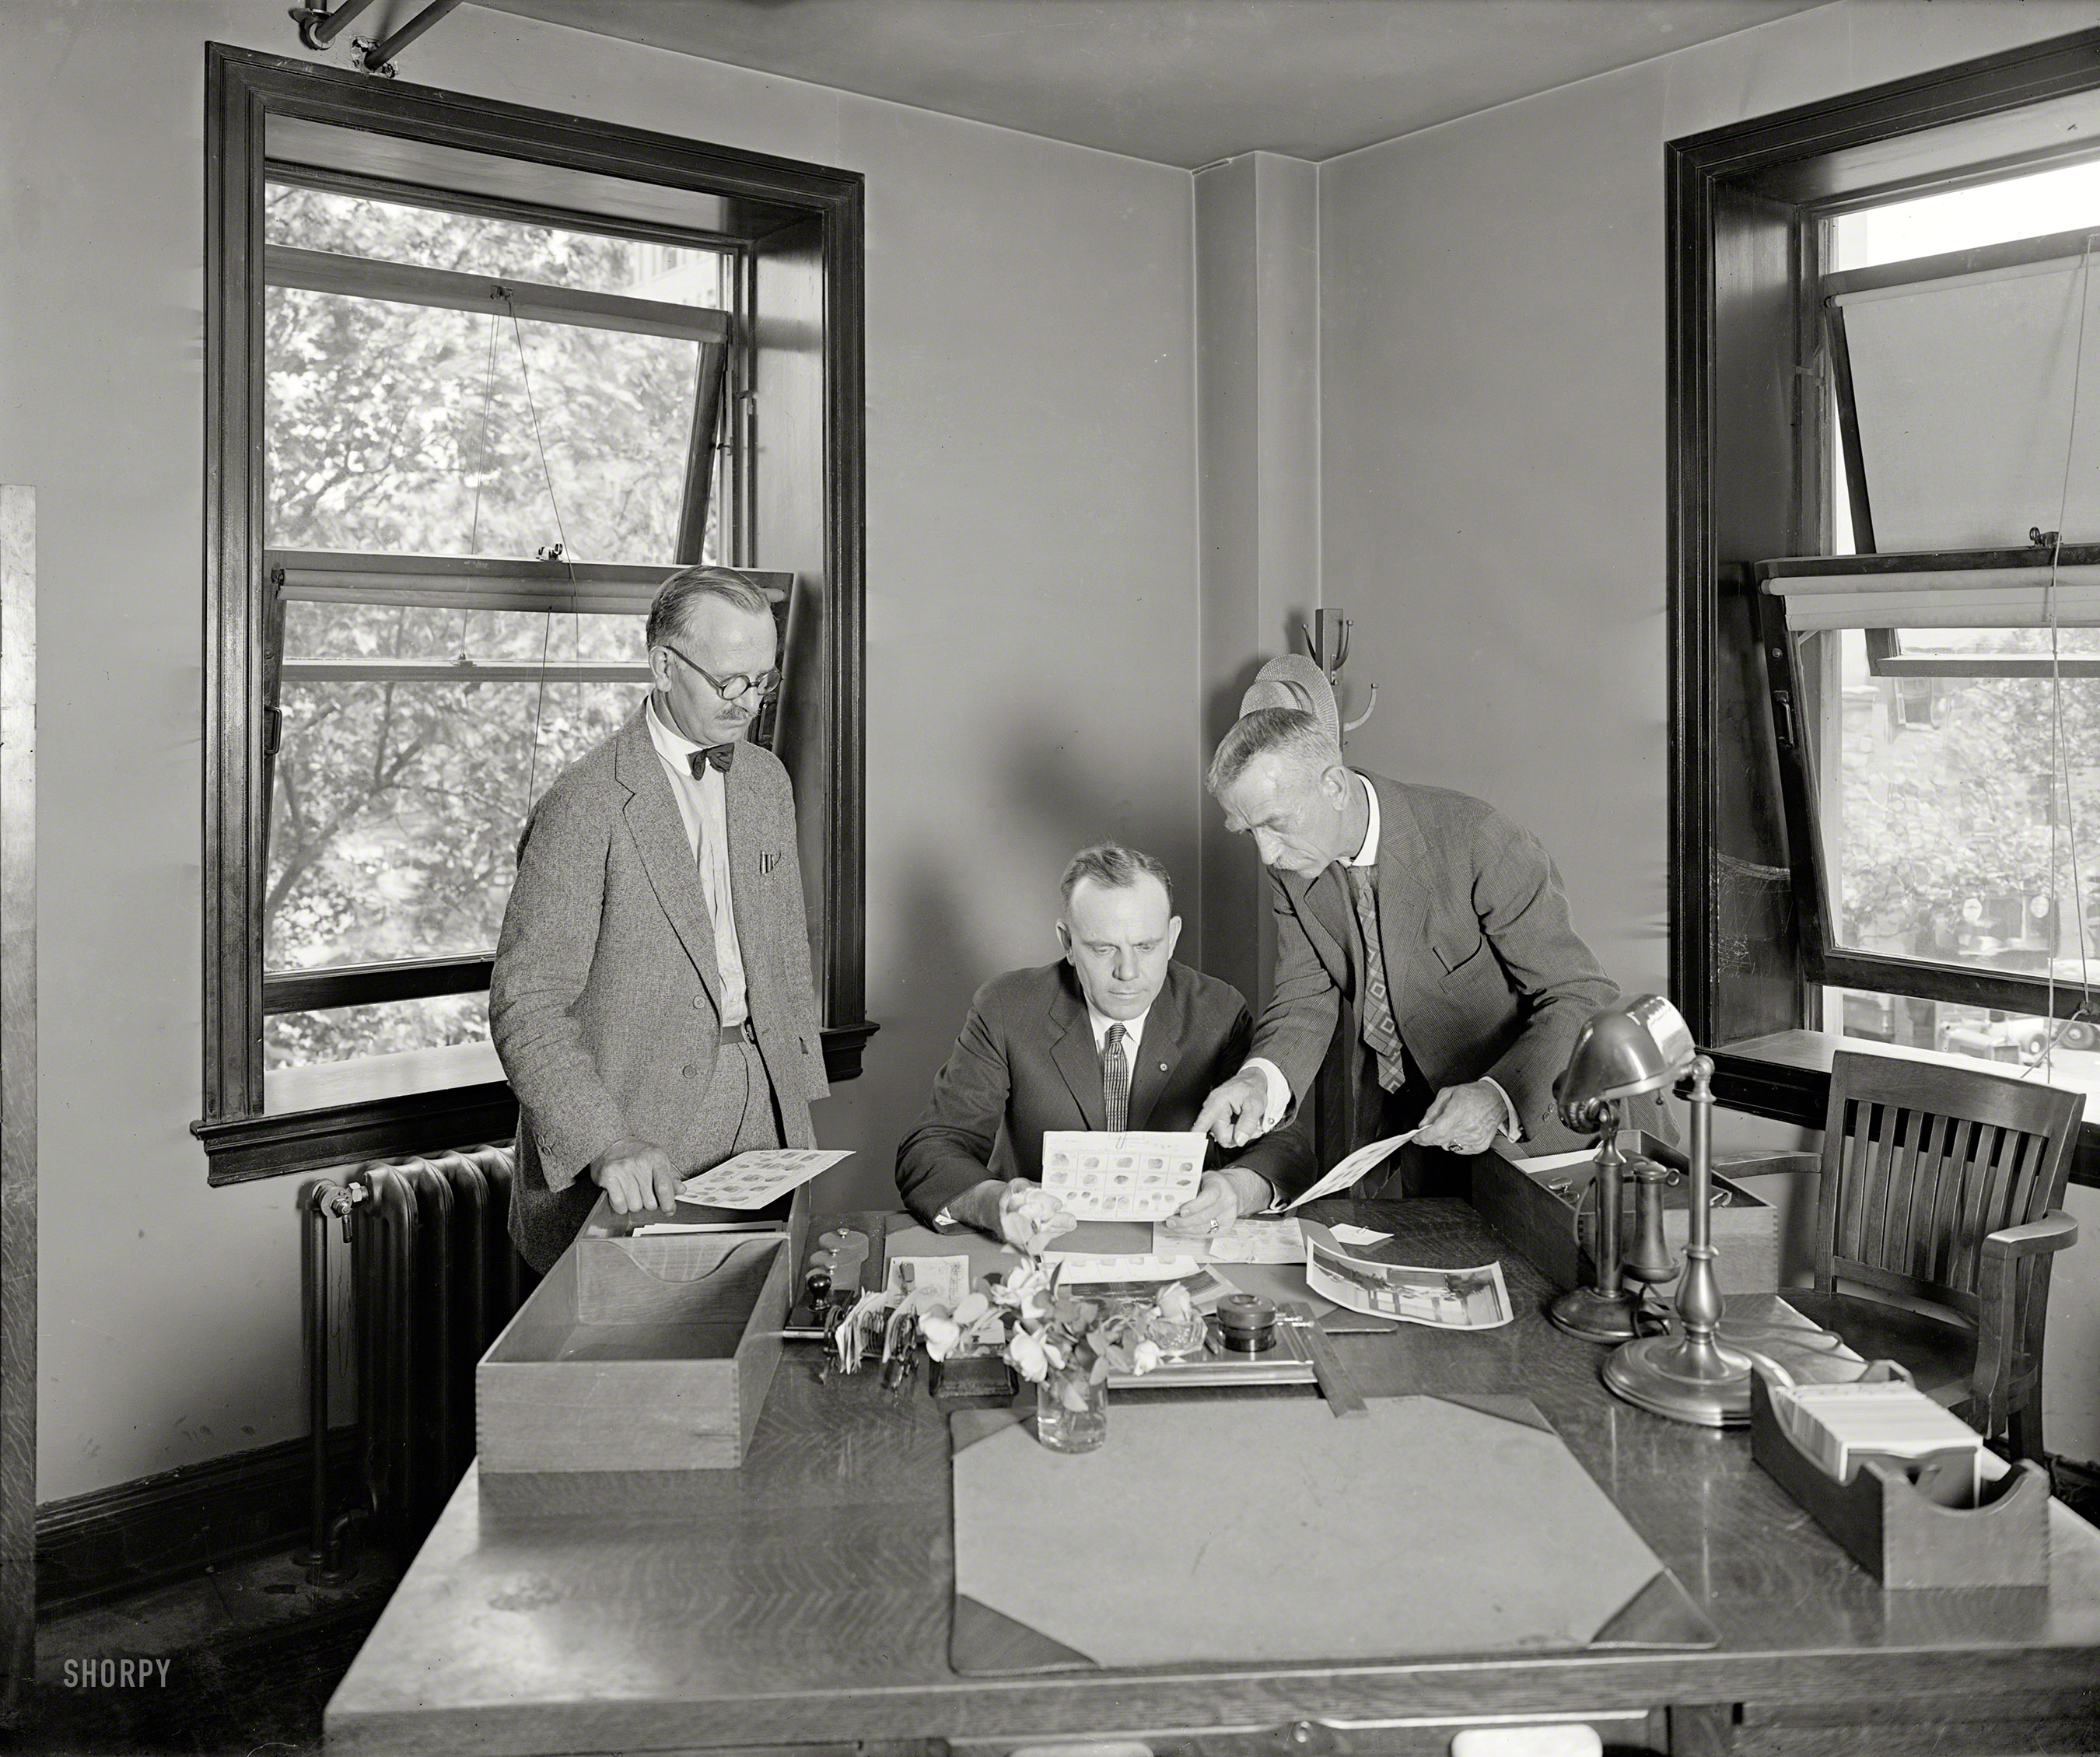 June 1926. "Bureau of Identification, Department of Justice, Washington." Poring over fingerprints at the forerunner of the FBI. National Photo Co. View full size.